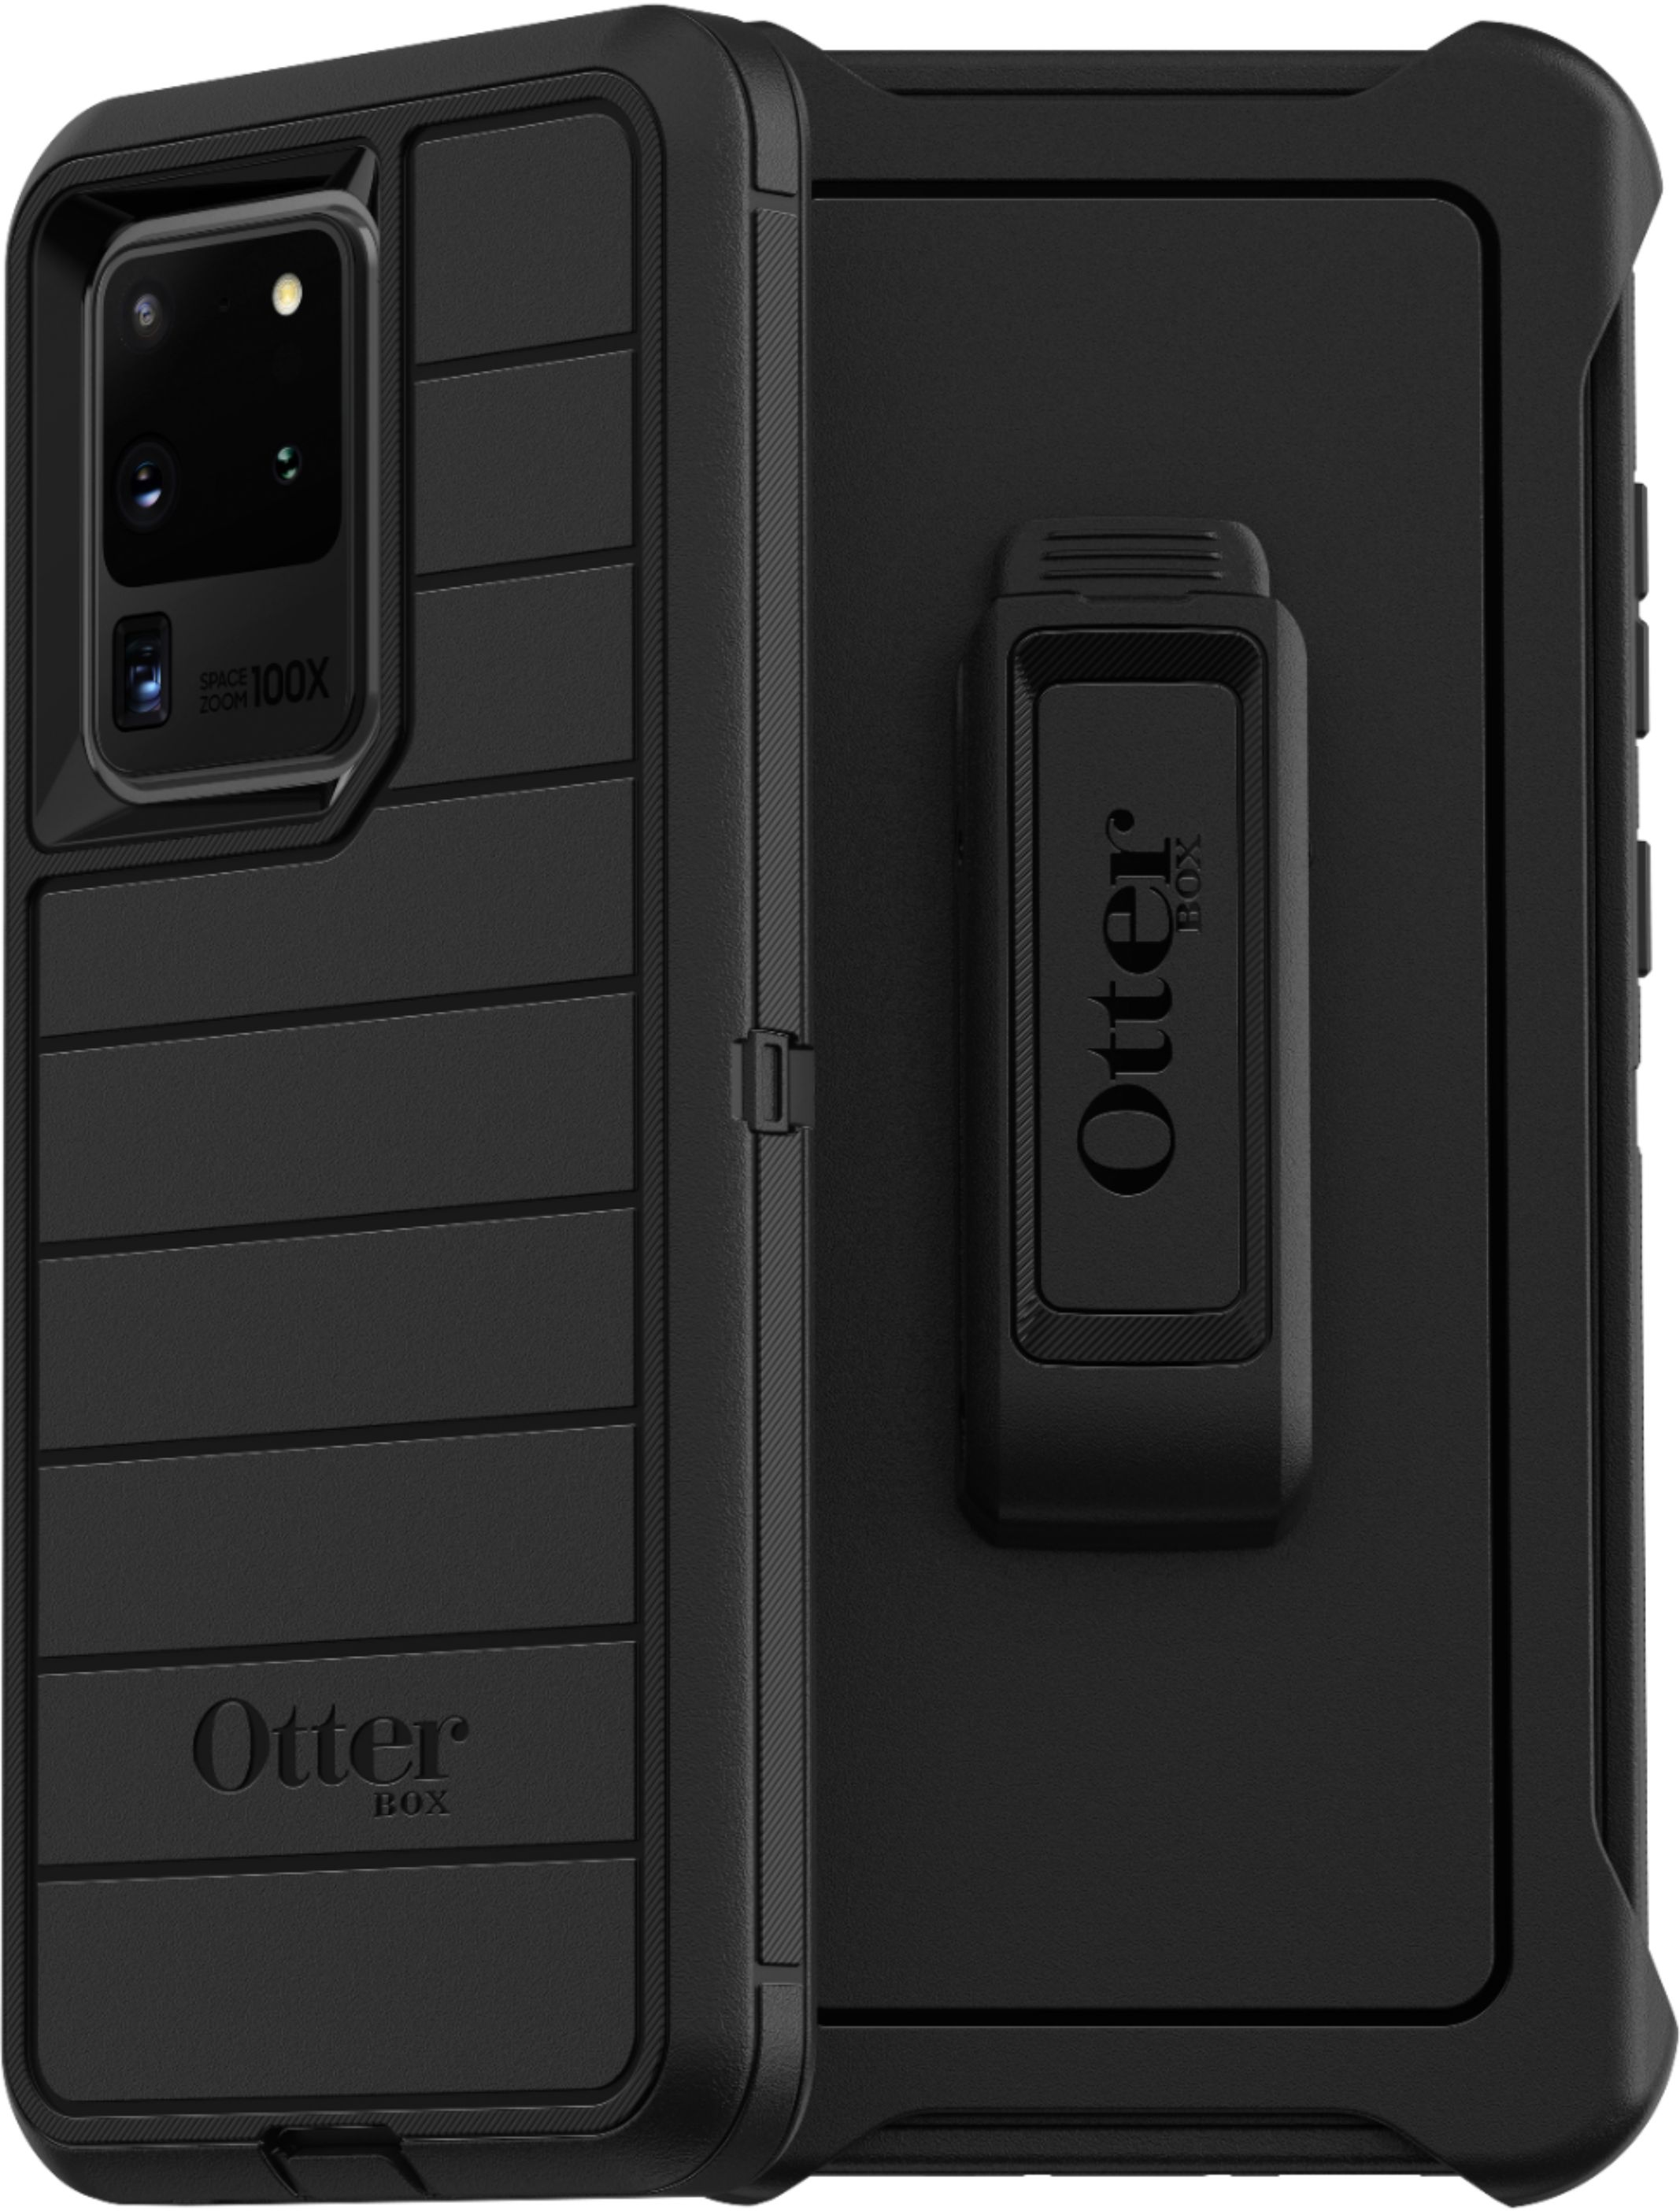 Angle View: OtterBox - Defender Series Pro Case for Samsung Galaxy S20 Ultra 5G - Black